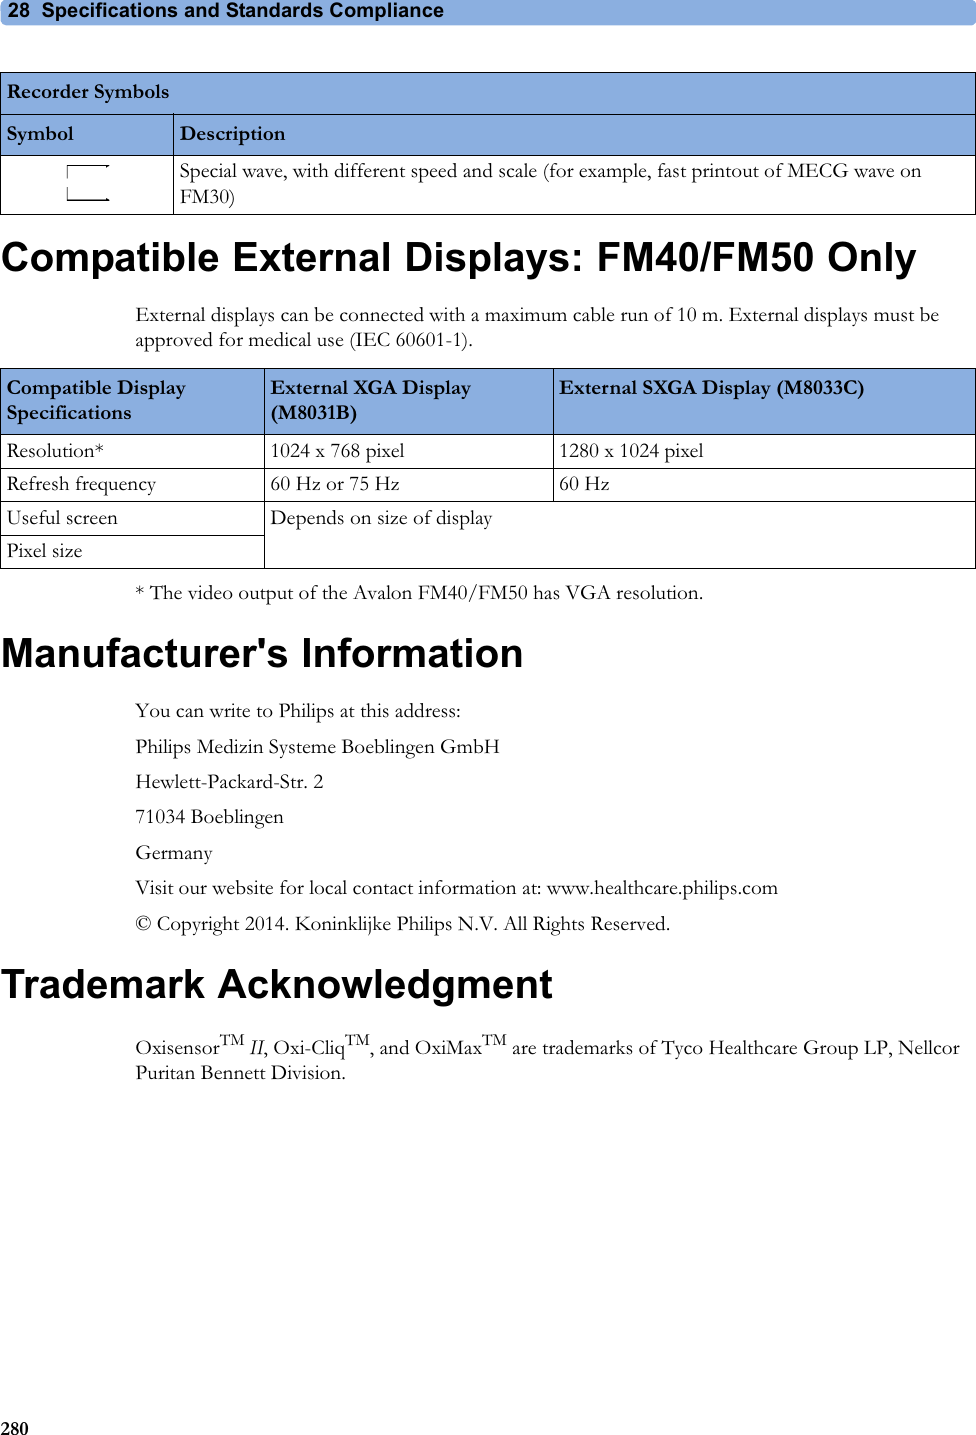 28  Specifications and Standards Compliance280Compatible External Displays: FM40/FM50 OnlyExternal displays can be connected with a maximum cable run of 10 m. External displays must be approved for medical use (IEC 60601-1).* The video output of the Avalon FM40/FM50 has VGA resolution.Manufacturer&apos;s InformationYou can write to Philips at this address:Philips Medizin Systeme Boeblingen GmbHHewlett-Packard-Str. 271034 BoeblingenGermanyVisit our website for local contact information at: www.healthcare.philips.com© Copyright 2014. Koninklijke Philips N.V. All Rights Reserved.Trademark AcknowledgmentOxisensorTM II, Oxi-CliqTM, and OxiMaxTM are trademarks of Tyco Healthcare Group LP, Nellcor Puritan Bennett Division.Special wave, with different speed and scale (for example, fast printout of MECG wave on FM30)Recorder SymbolsSymbol DescriptionCompatible Display SpecificationsExternal XGA Display (M8031B)External SXGA Display (M8033C)Resolution* 1024 x 768 pixel 1280 x 1024 pixelRefresh frequency 60 Hz or 75 Hz 60 HzUseful screen Depends on size of displayPixel size